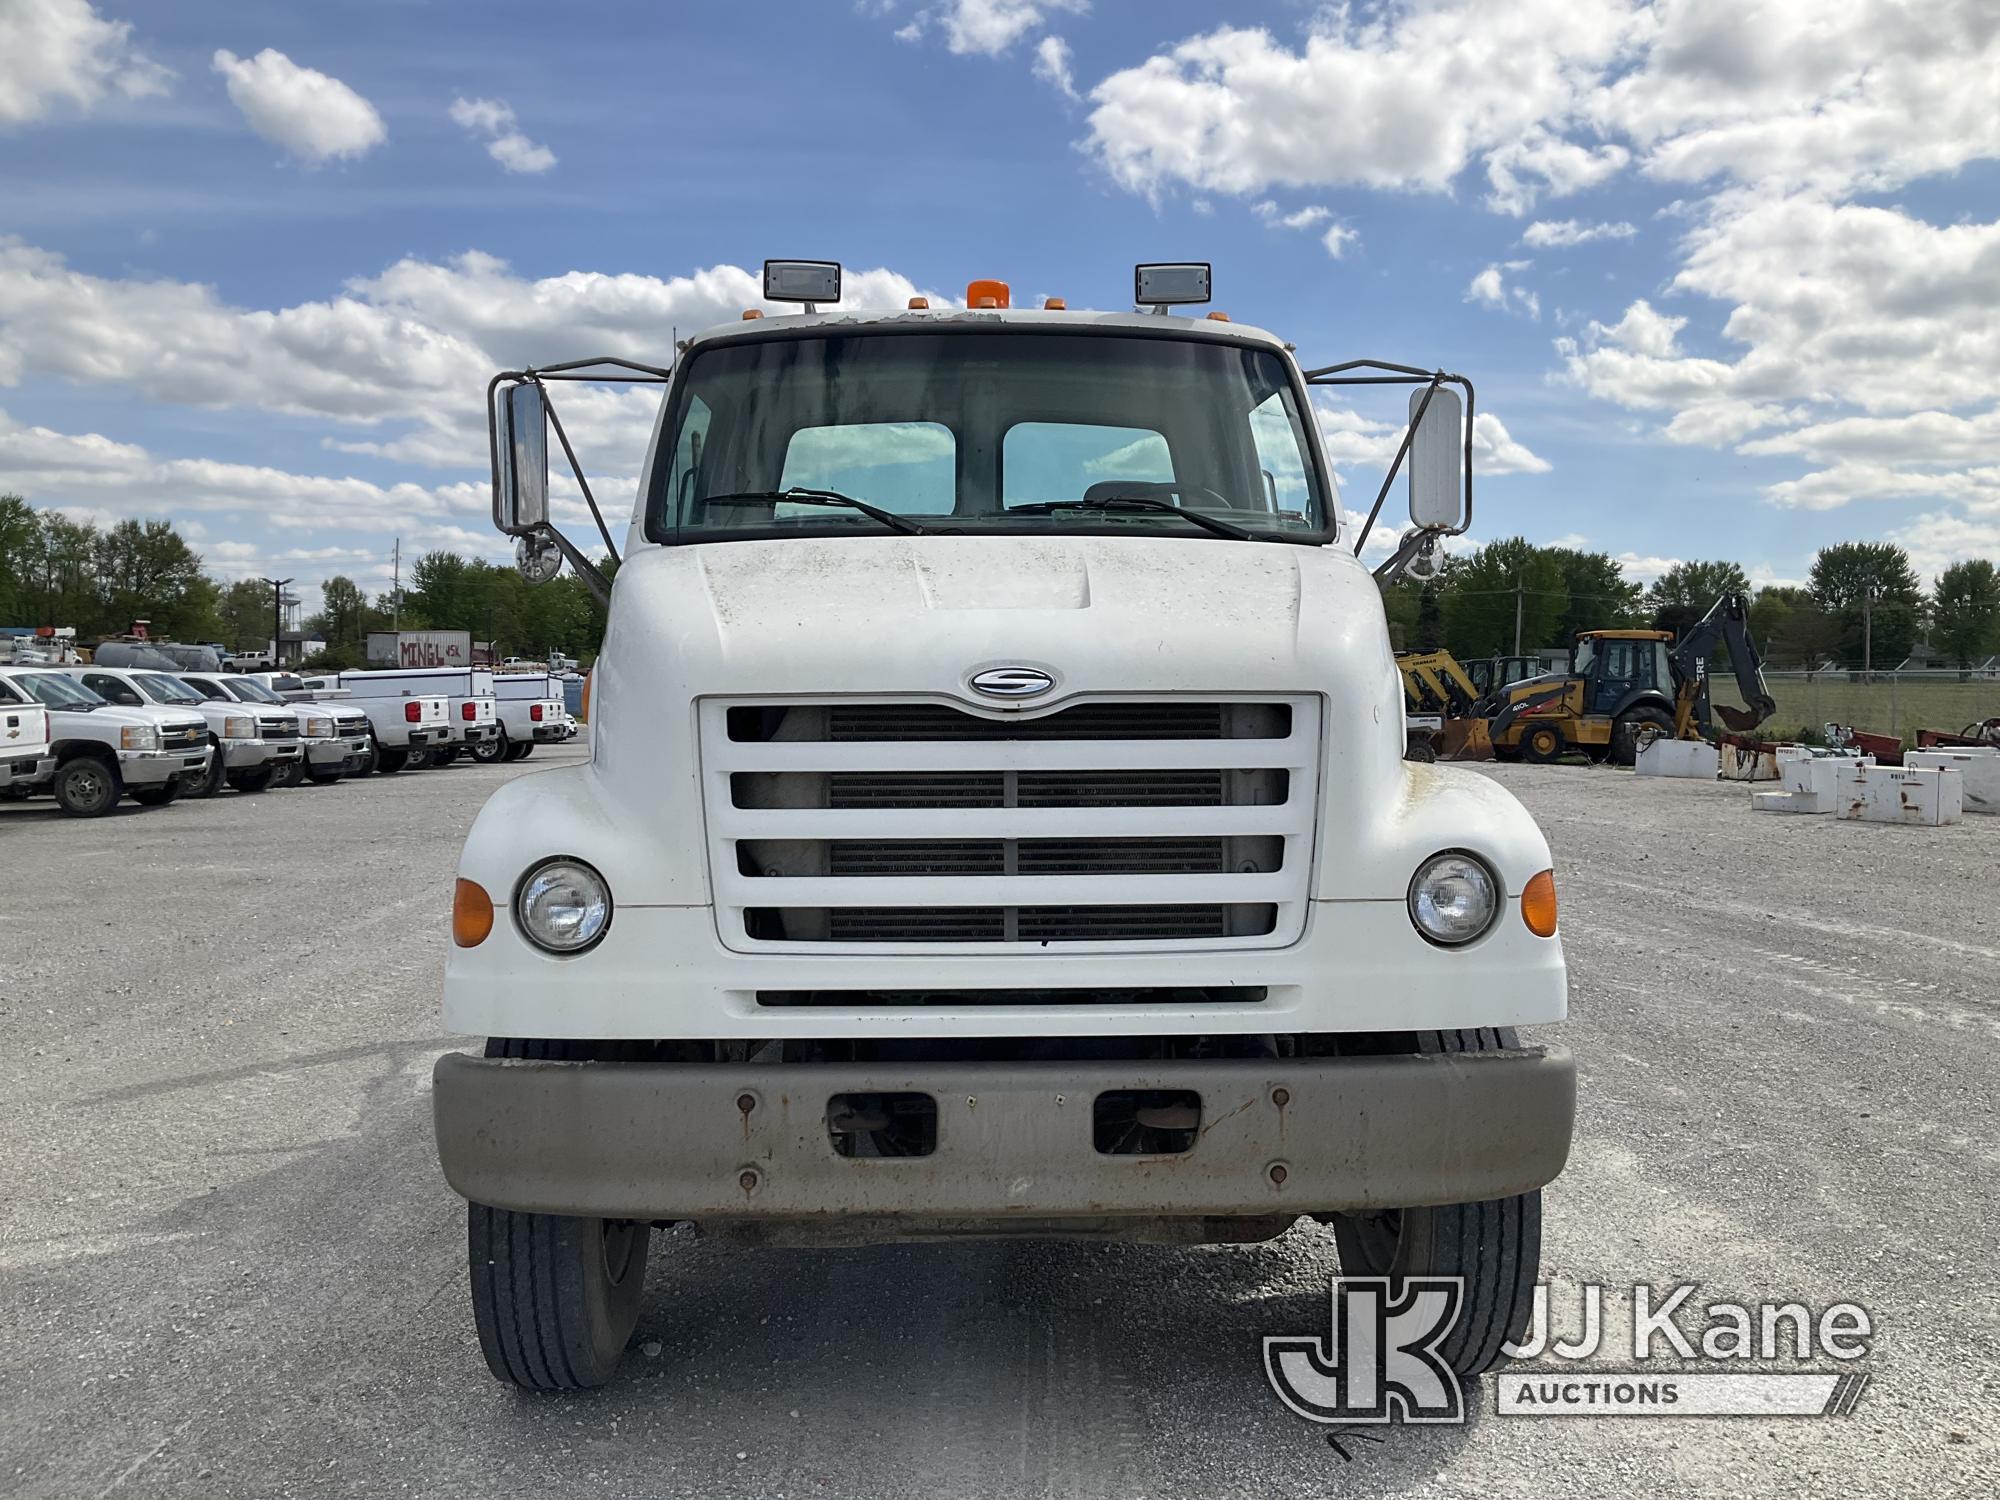 (Hawk Point, MO) 2000 Sterling L7500 Reel Loader Truck Runs, Moves & Operates) (Rust/Paint Damage).